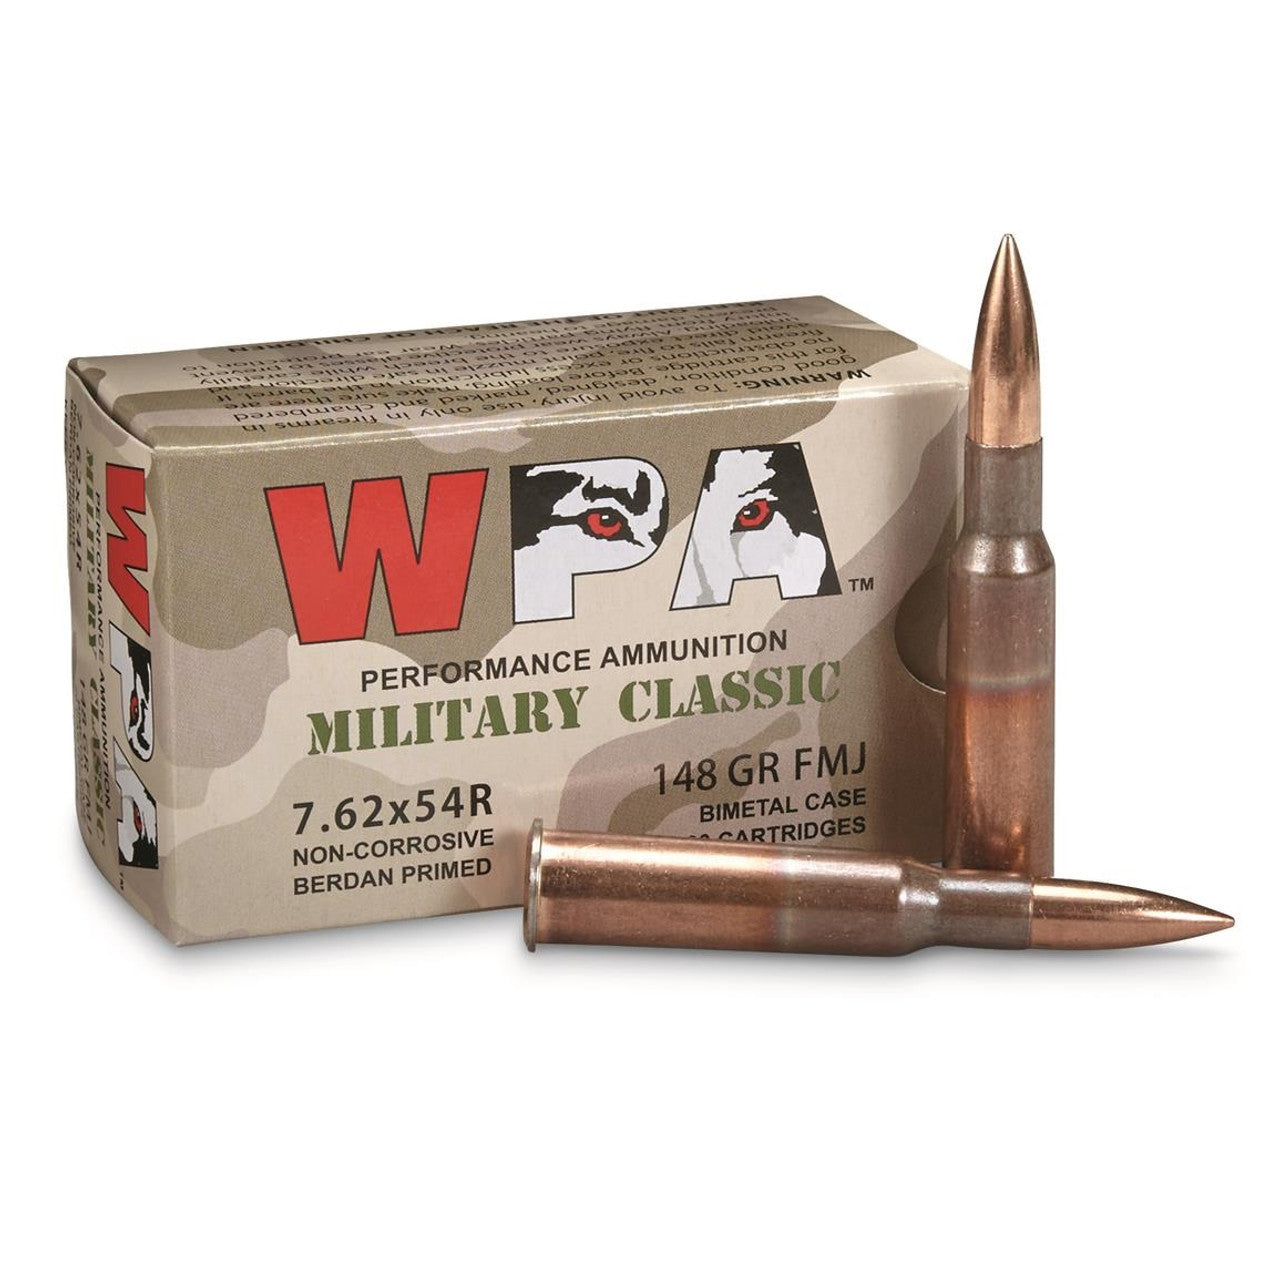 Wolf Military Classic 7.62x54R Ammunition 148 Grain Full Metal Jacket 20 Rounds